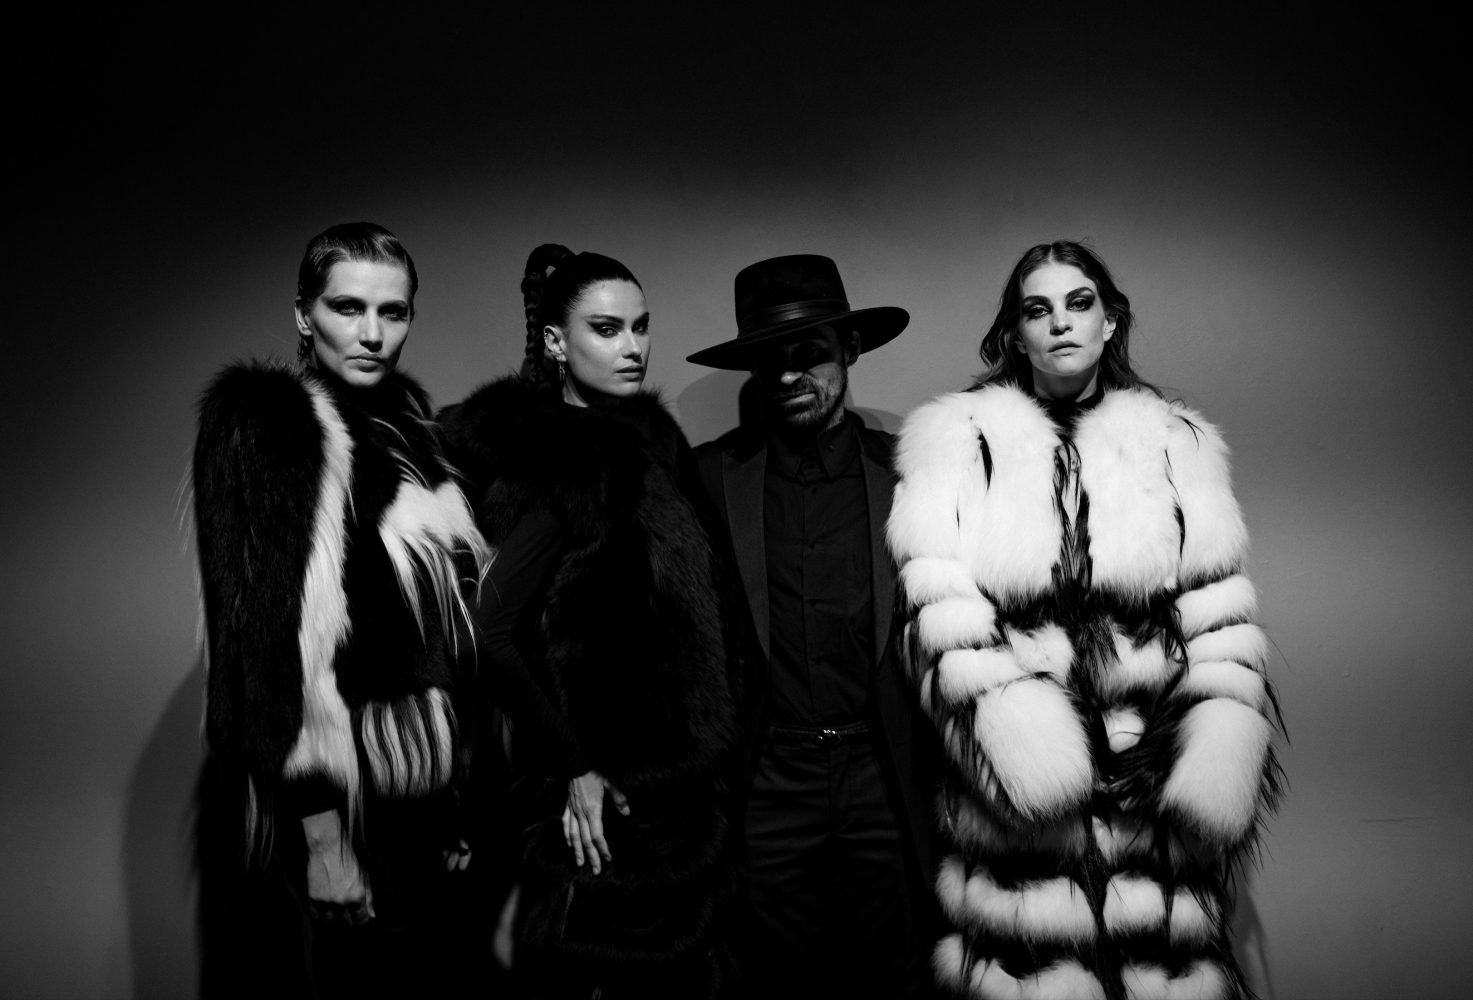 Quentin Veron and his models in black and white fur